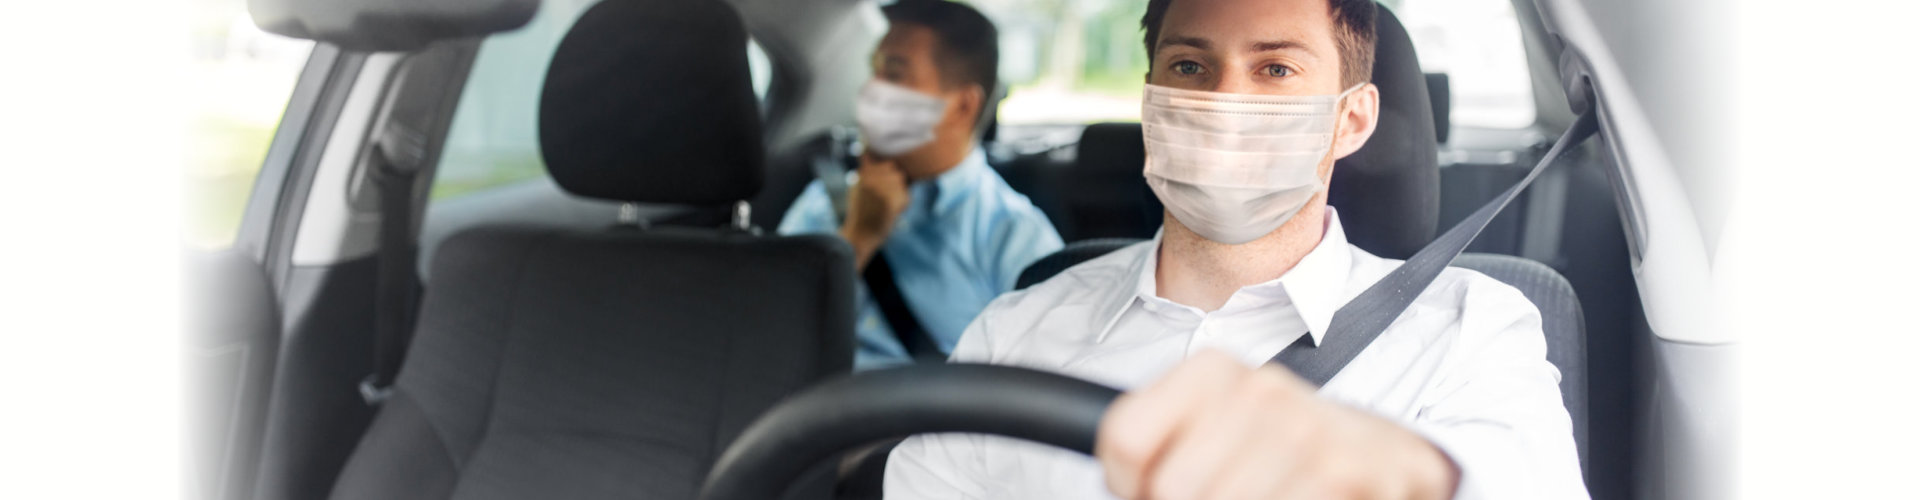 male taxi driver wearing face protective medical mask